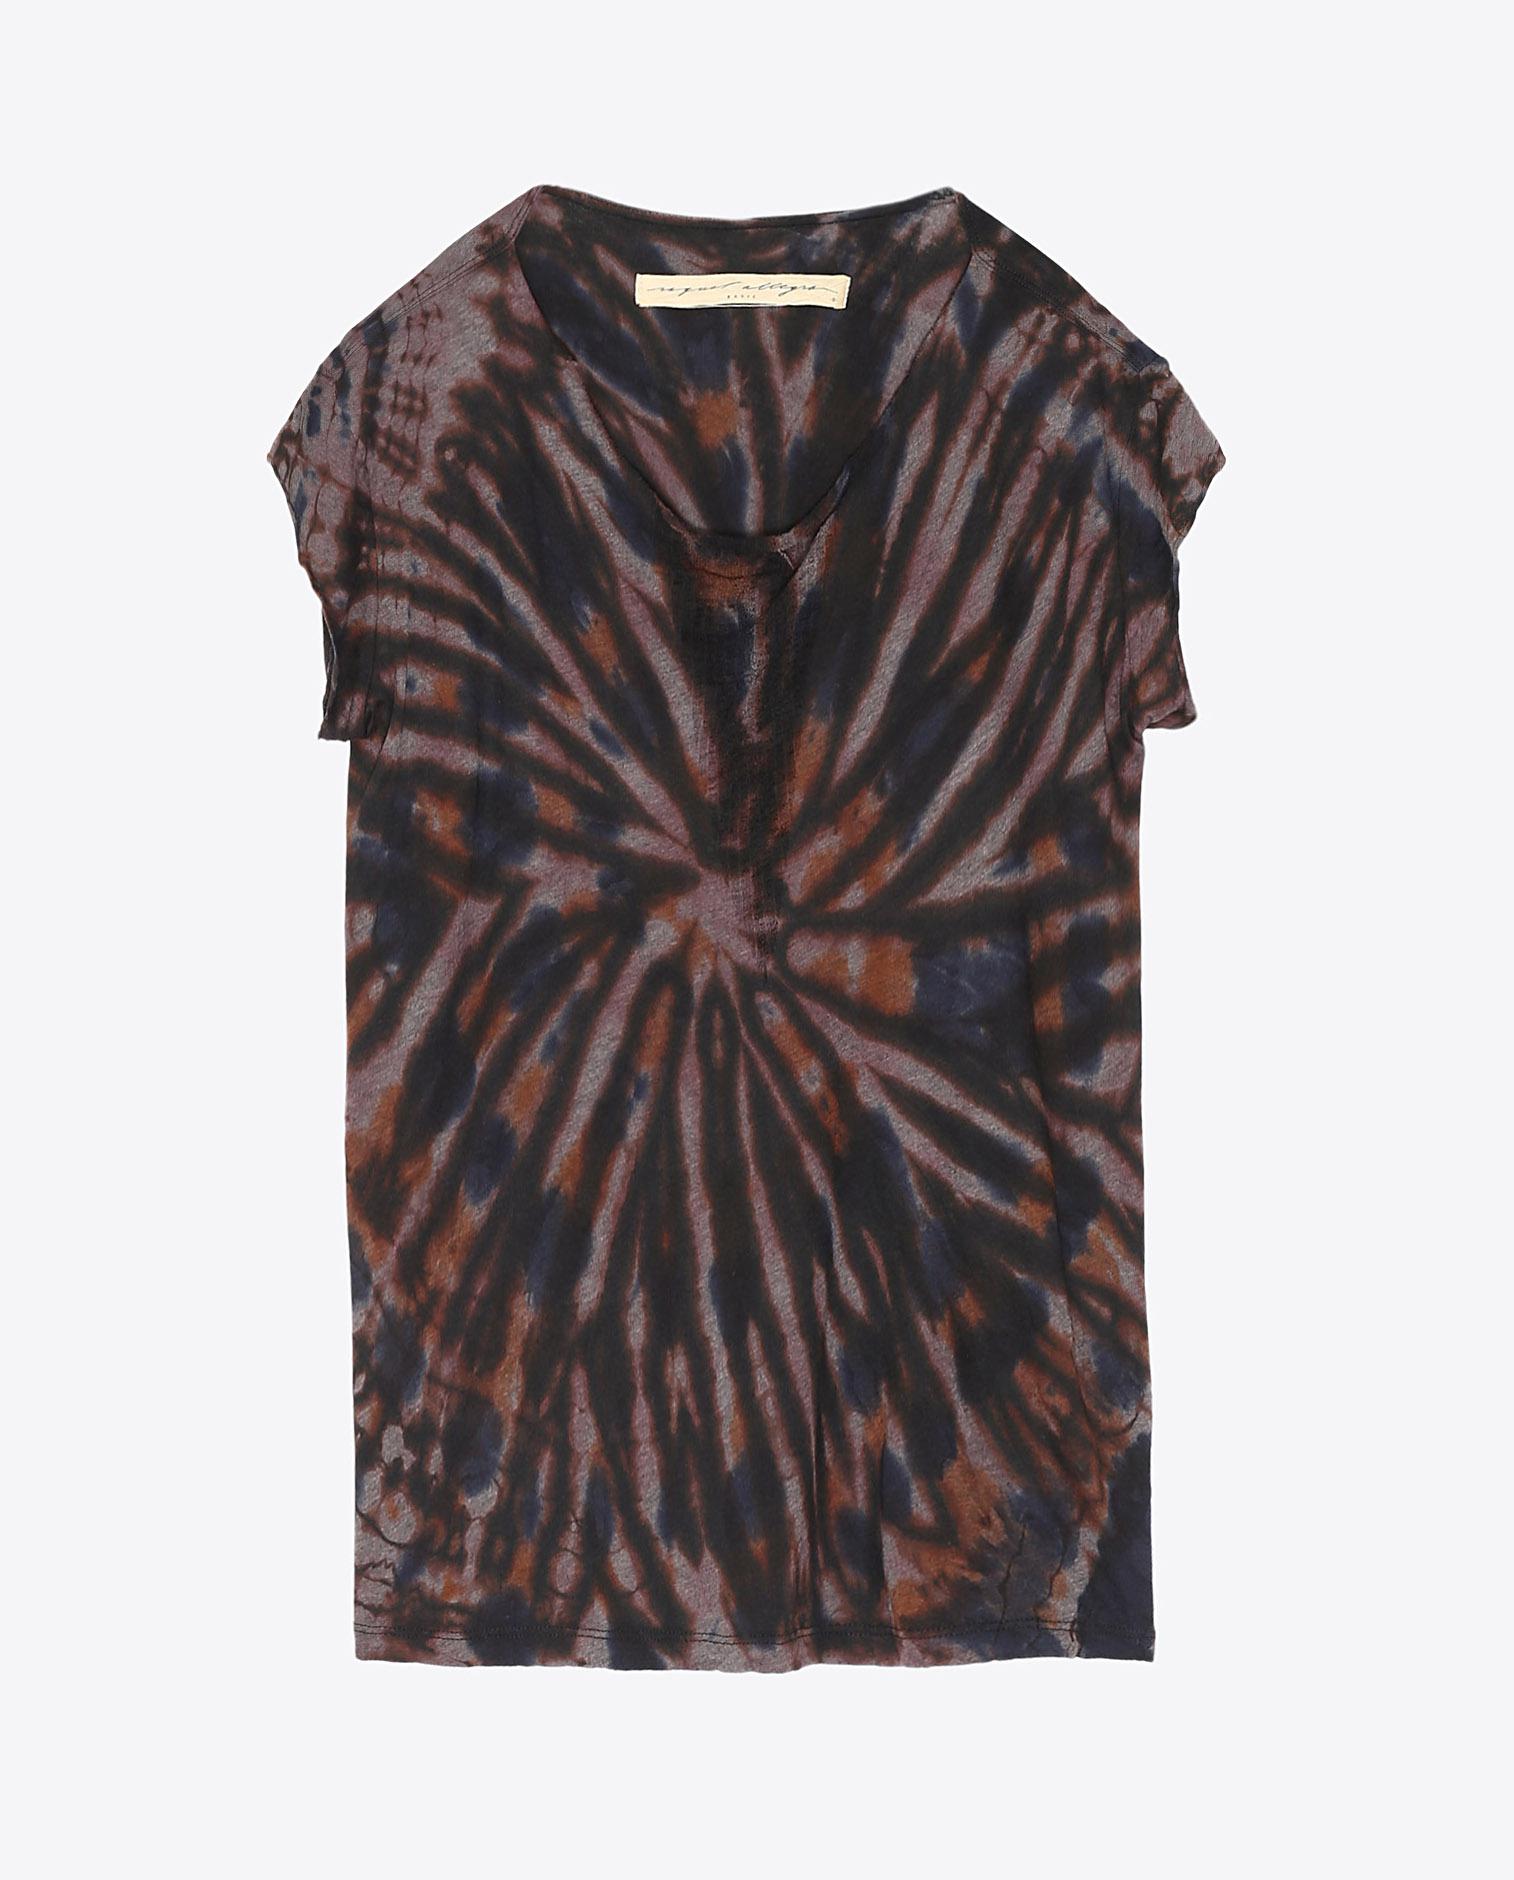 Raquel Allegra Pré-Collection Shred Front Muscle Tee Tie & Dye - Black Tiger  